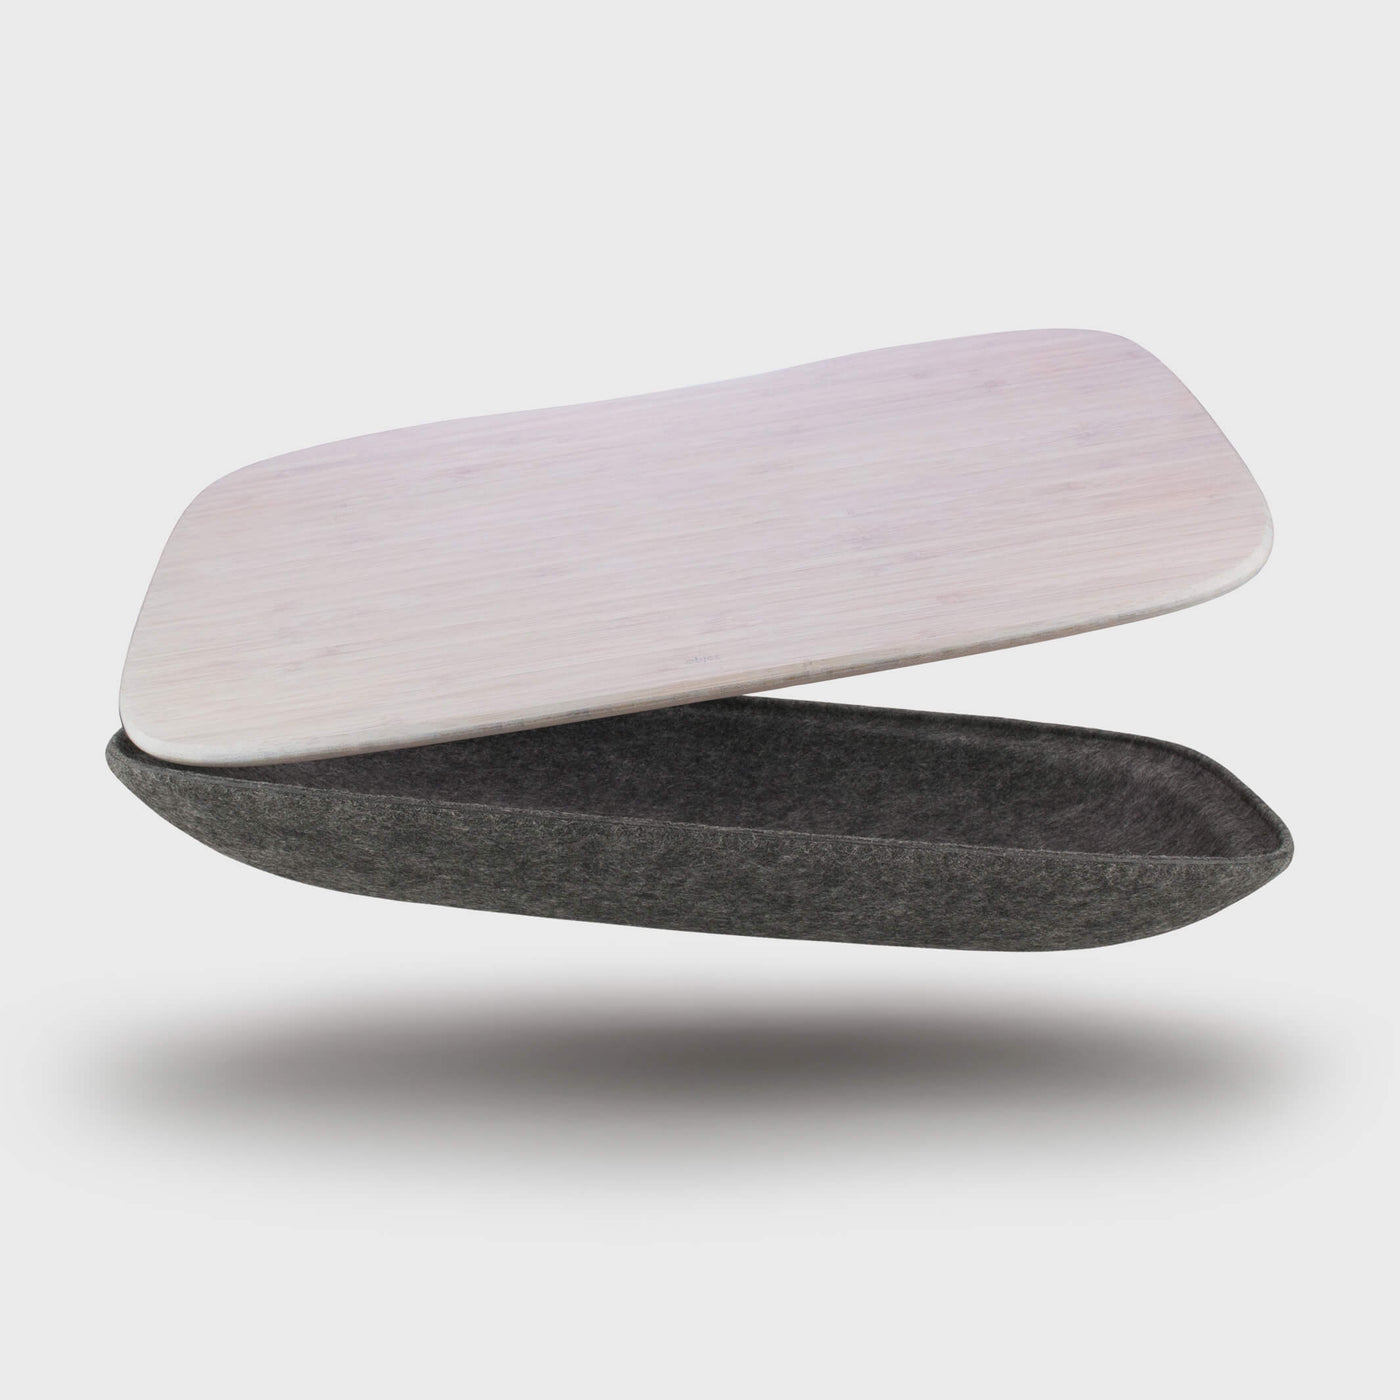 Lapod lap desk with storage limited edition with colour lap tray, floating and open. Felt, bamboo: Grain / Charcoal